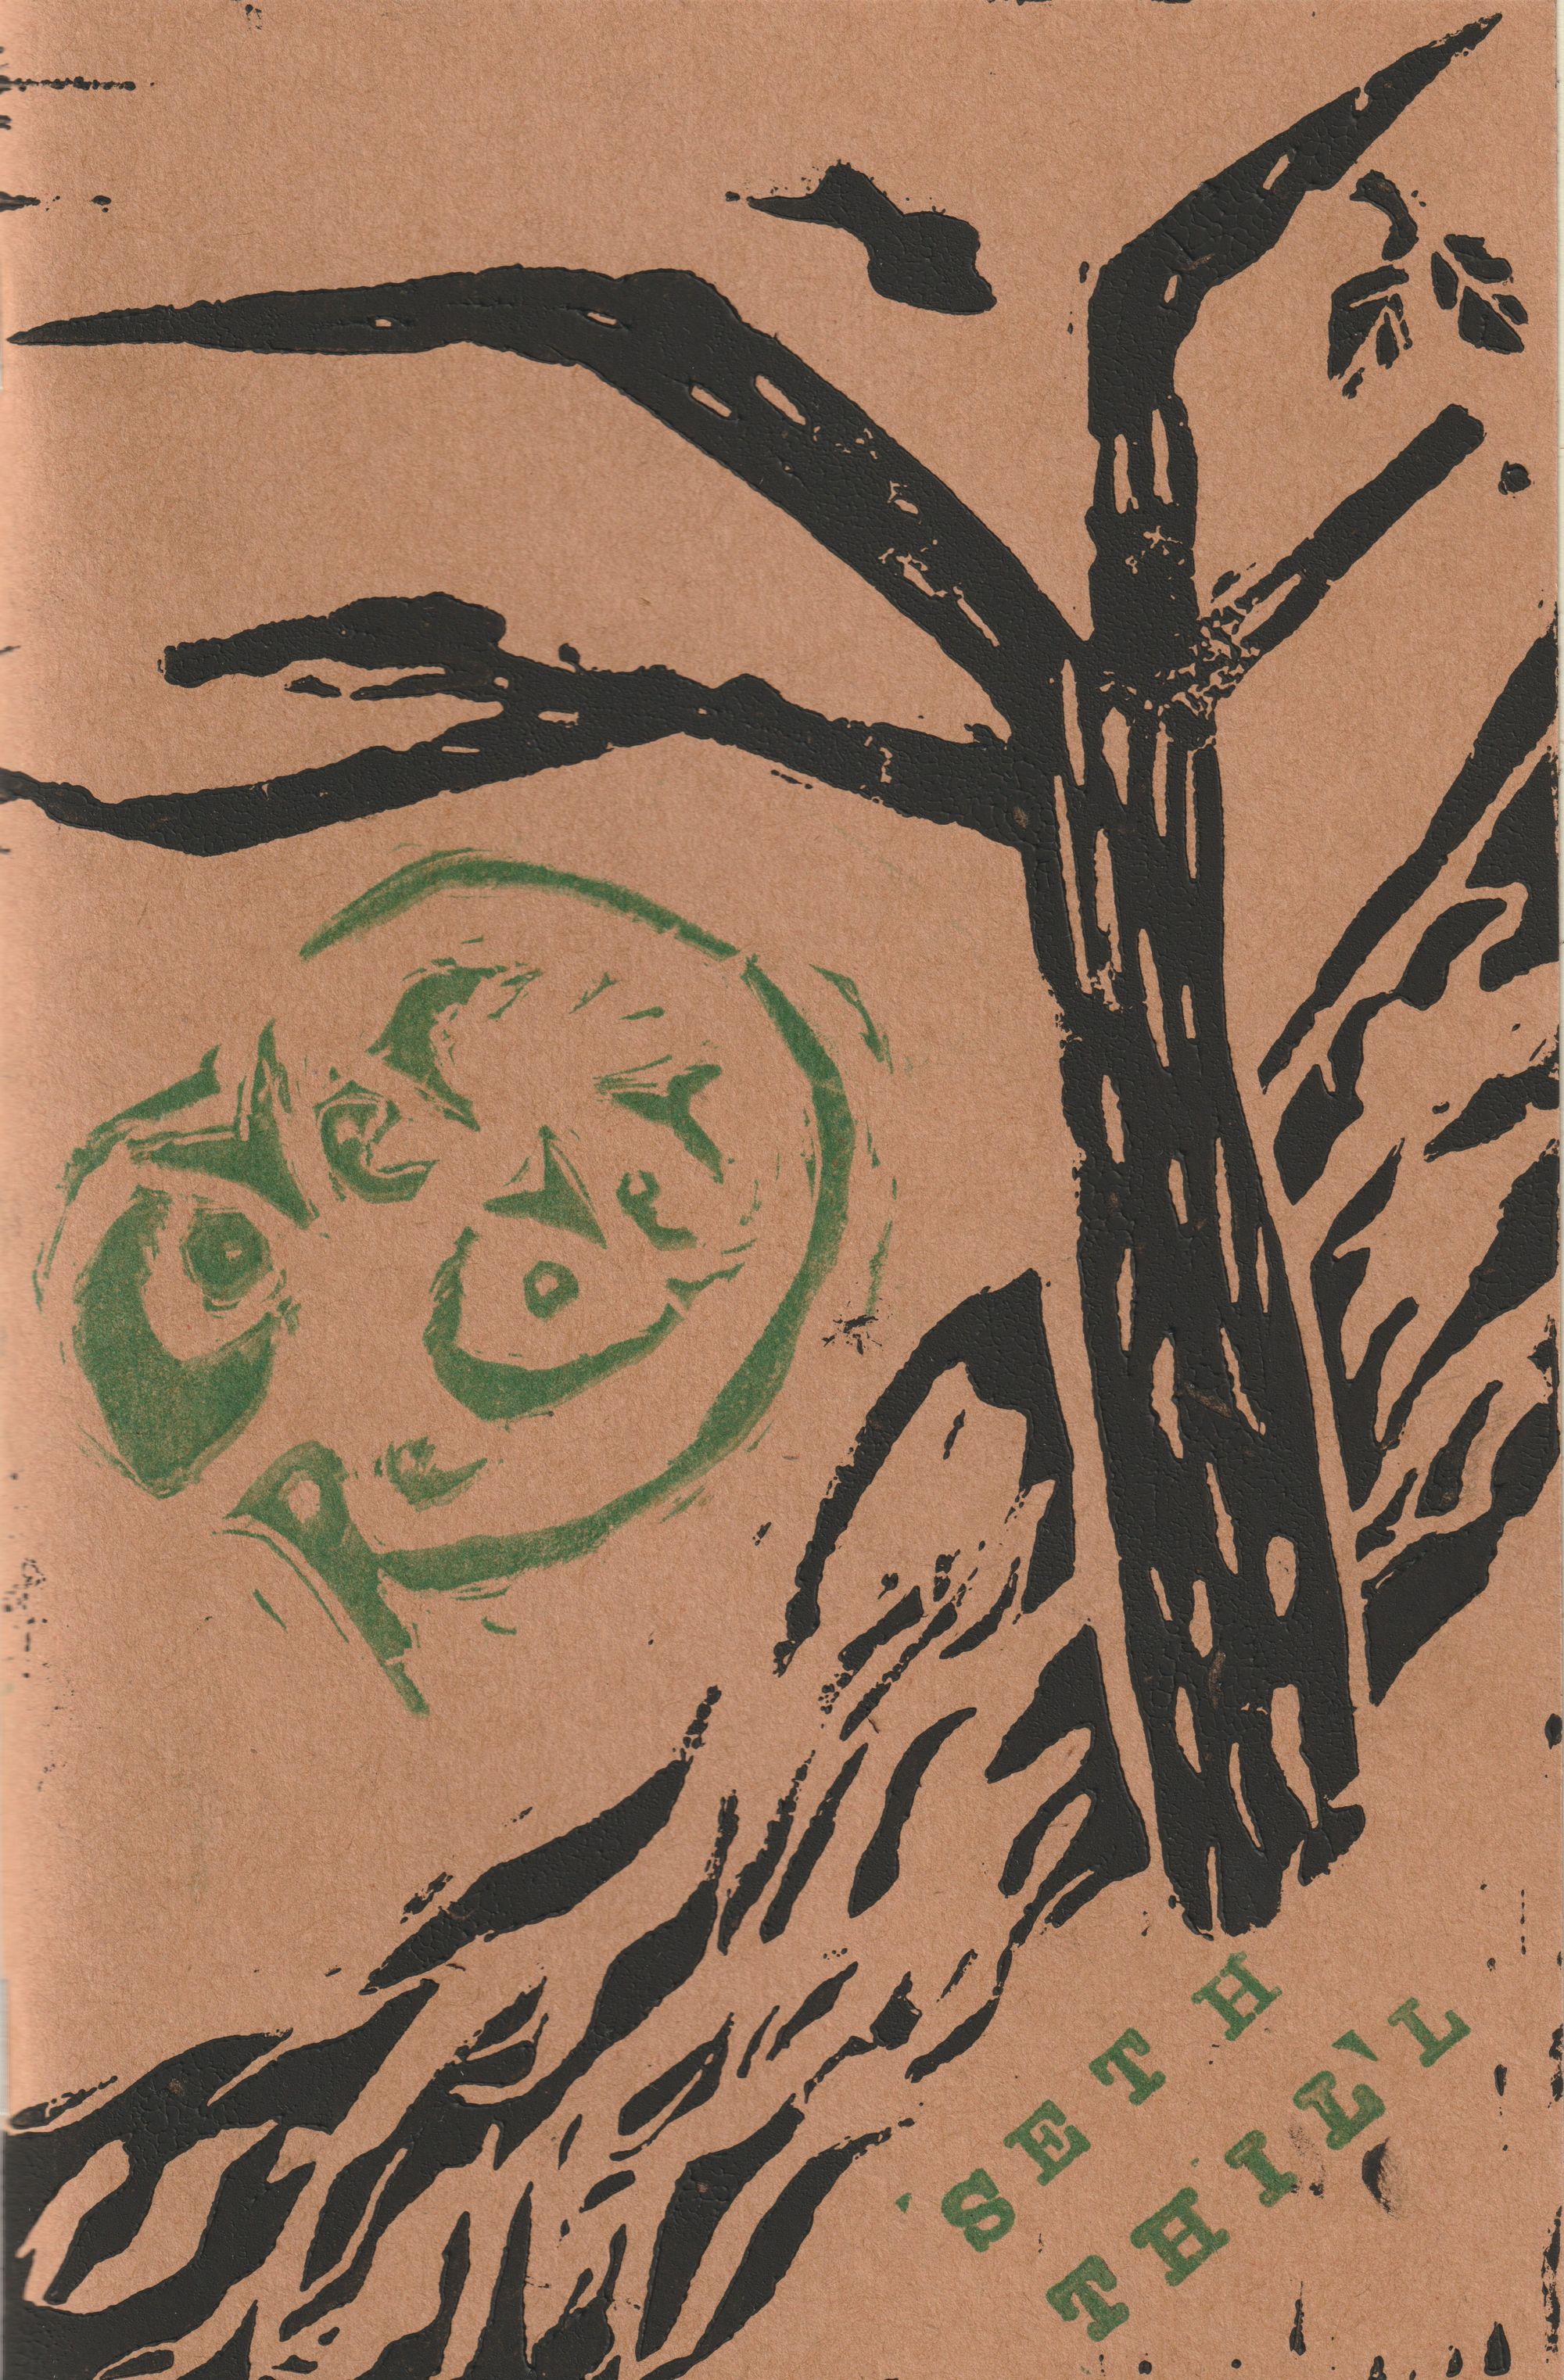 The cover of the chapbook, Cover, Recover by Seth Thill. Linocut print on cardboard brown background.Black tree sits in foreground while riverflows past it, also in black. Silhouette of bird above tree.  